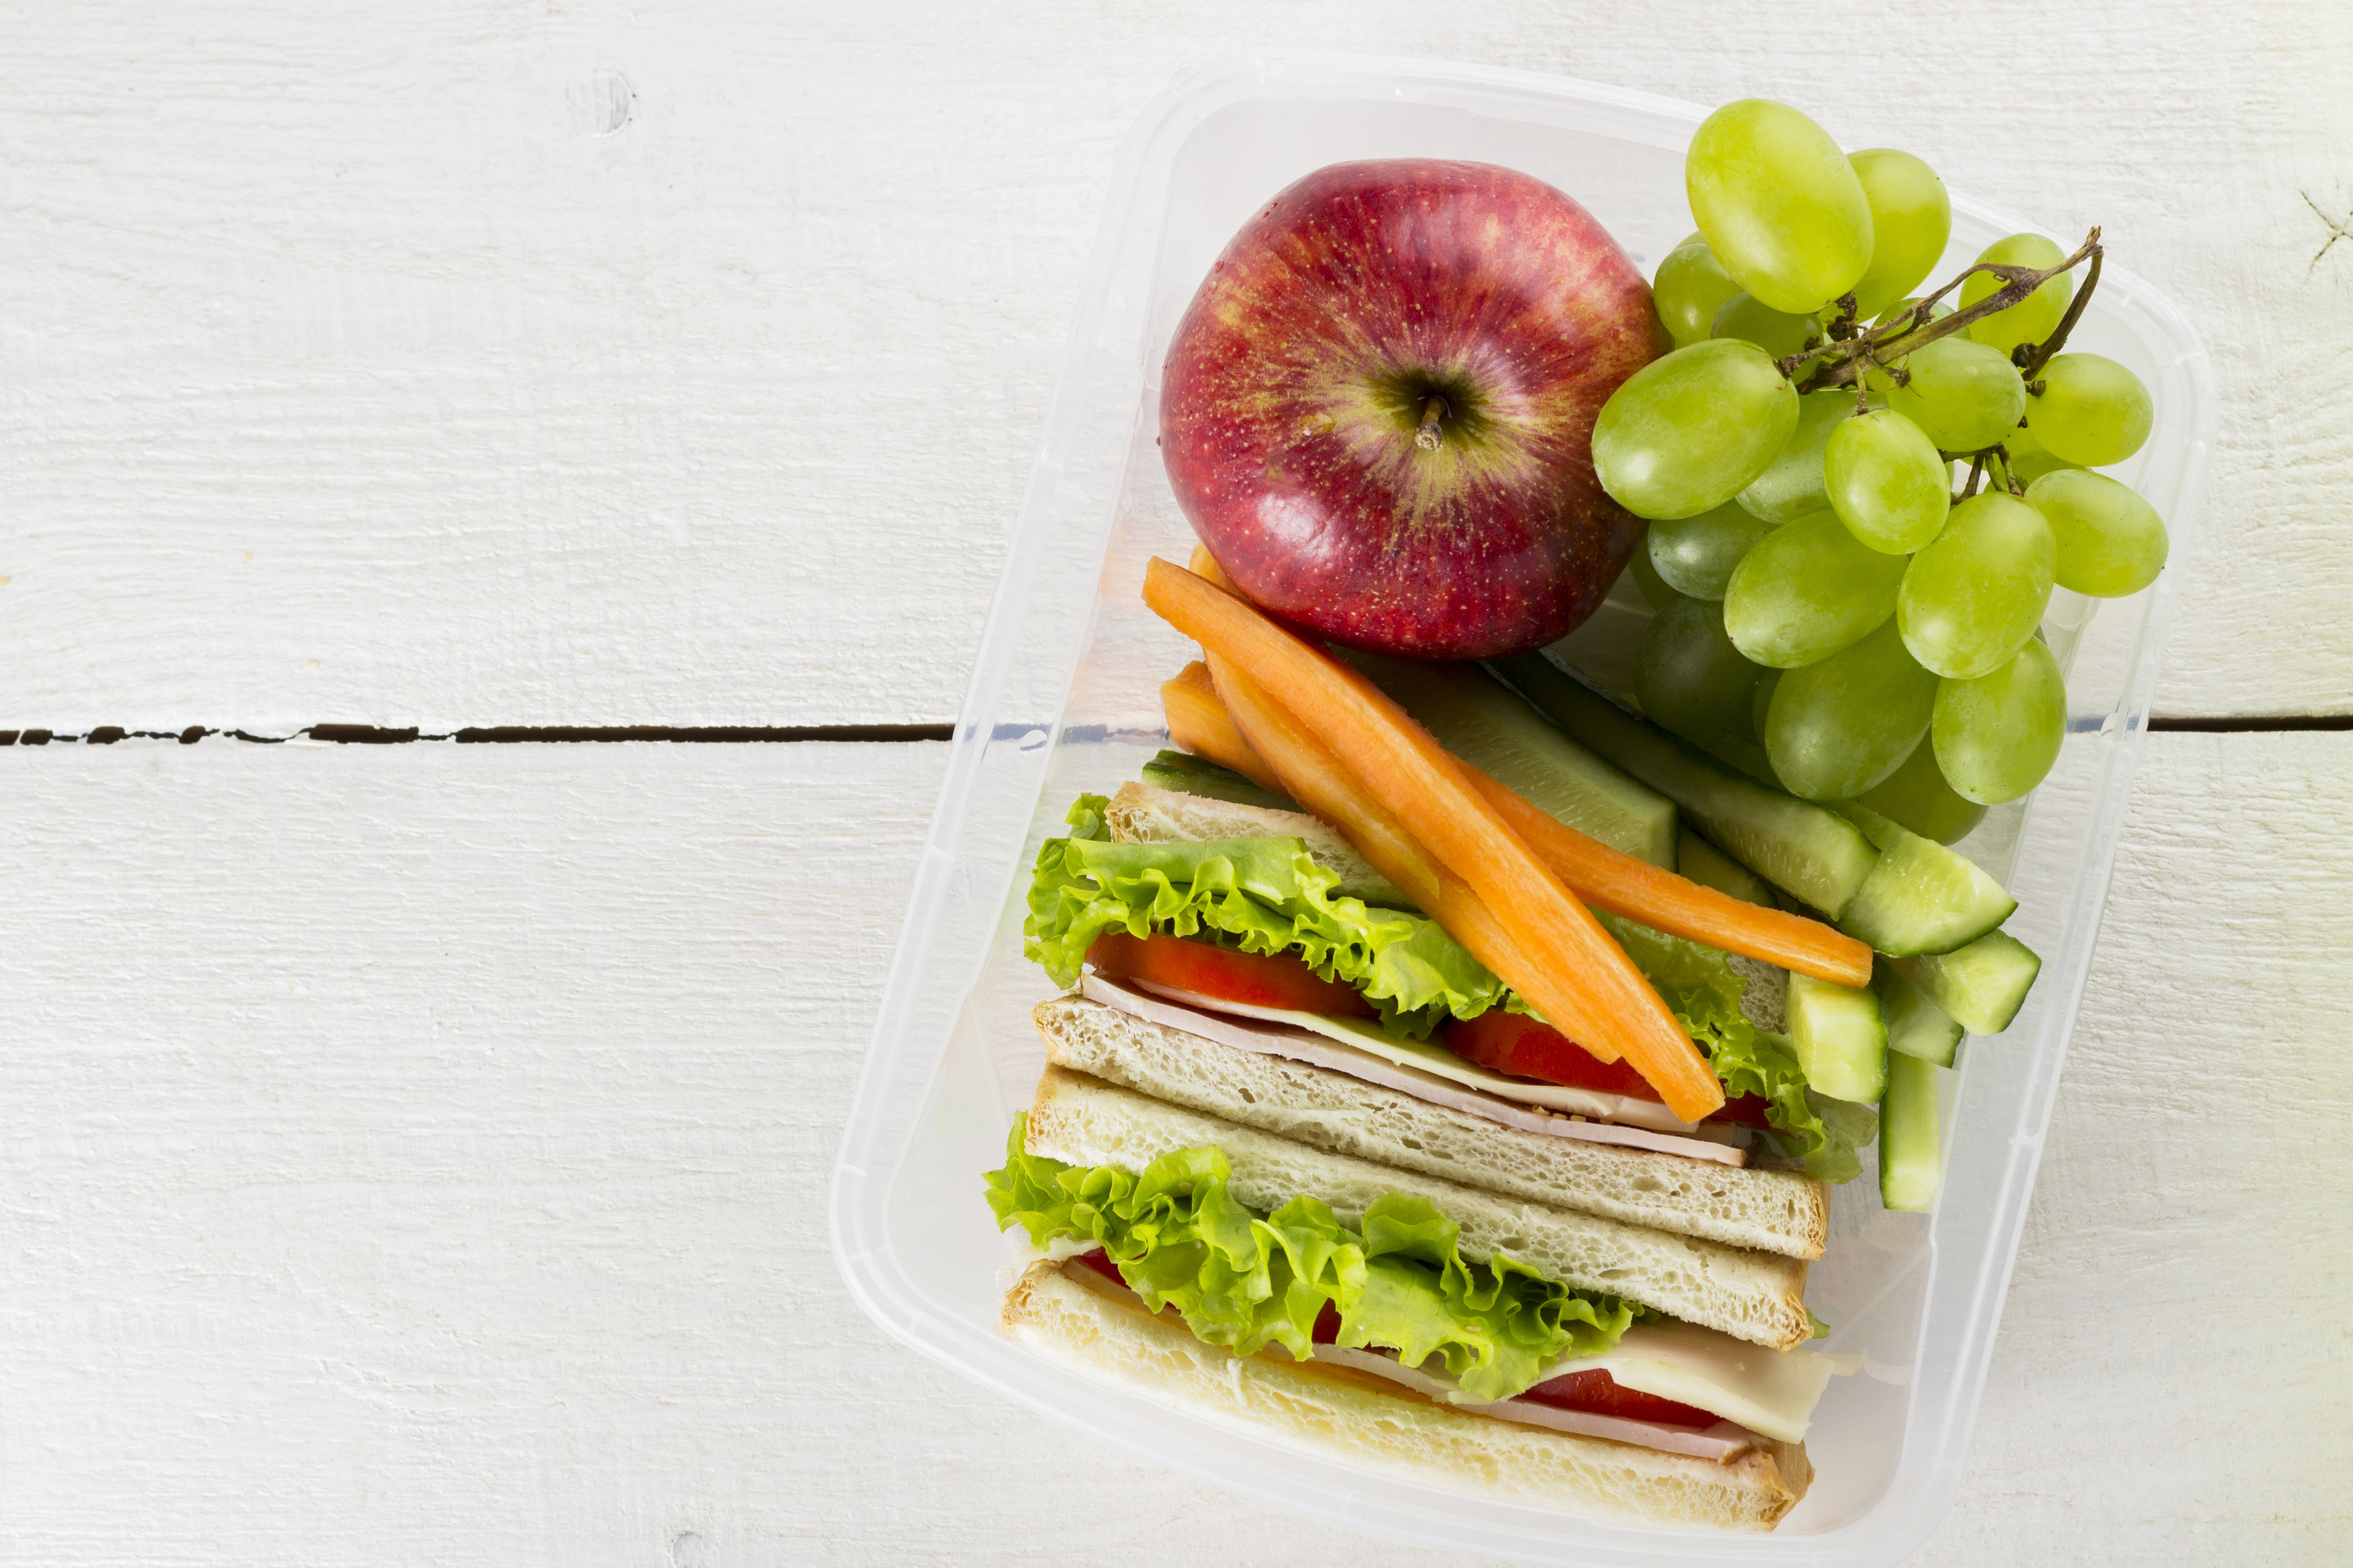 Responses from teachers include providing food for children who are coming to school hungry (iStock)